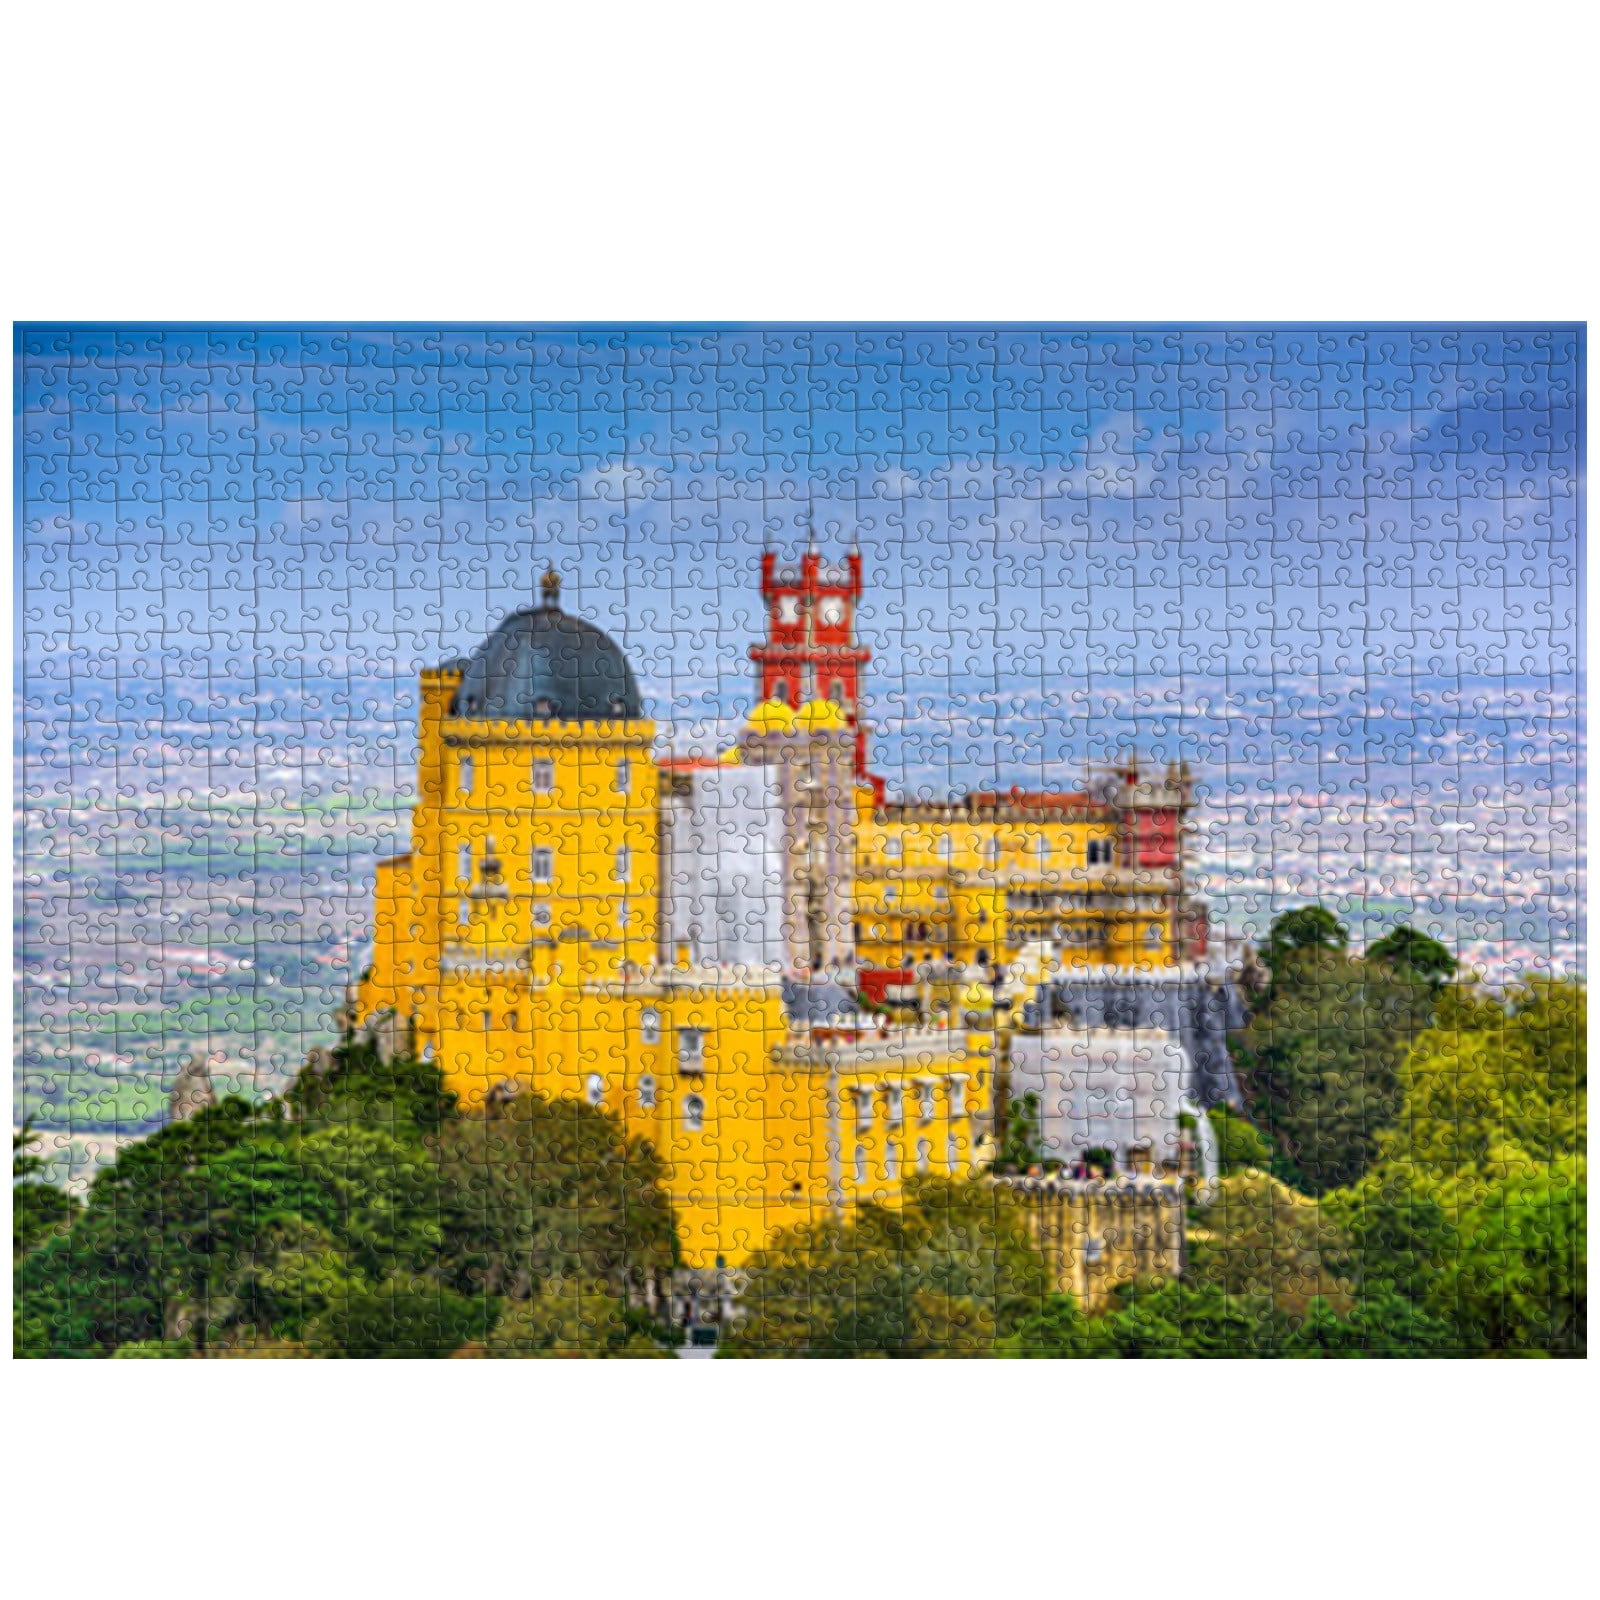 5000 Pieces Wooden Jigsaw Puzzles-Calm Lake-Game Quality Adult Assembling Jigsaw Puzzle Children Children Educational Toys Gift